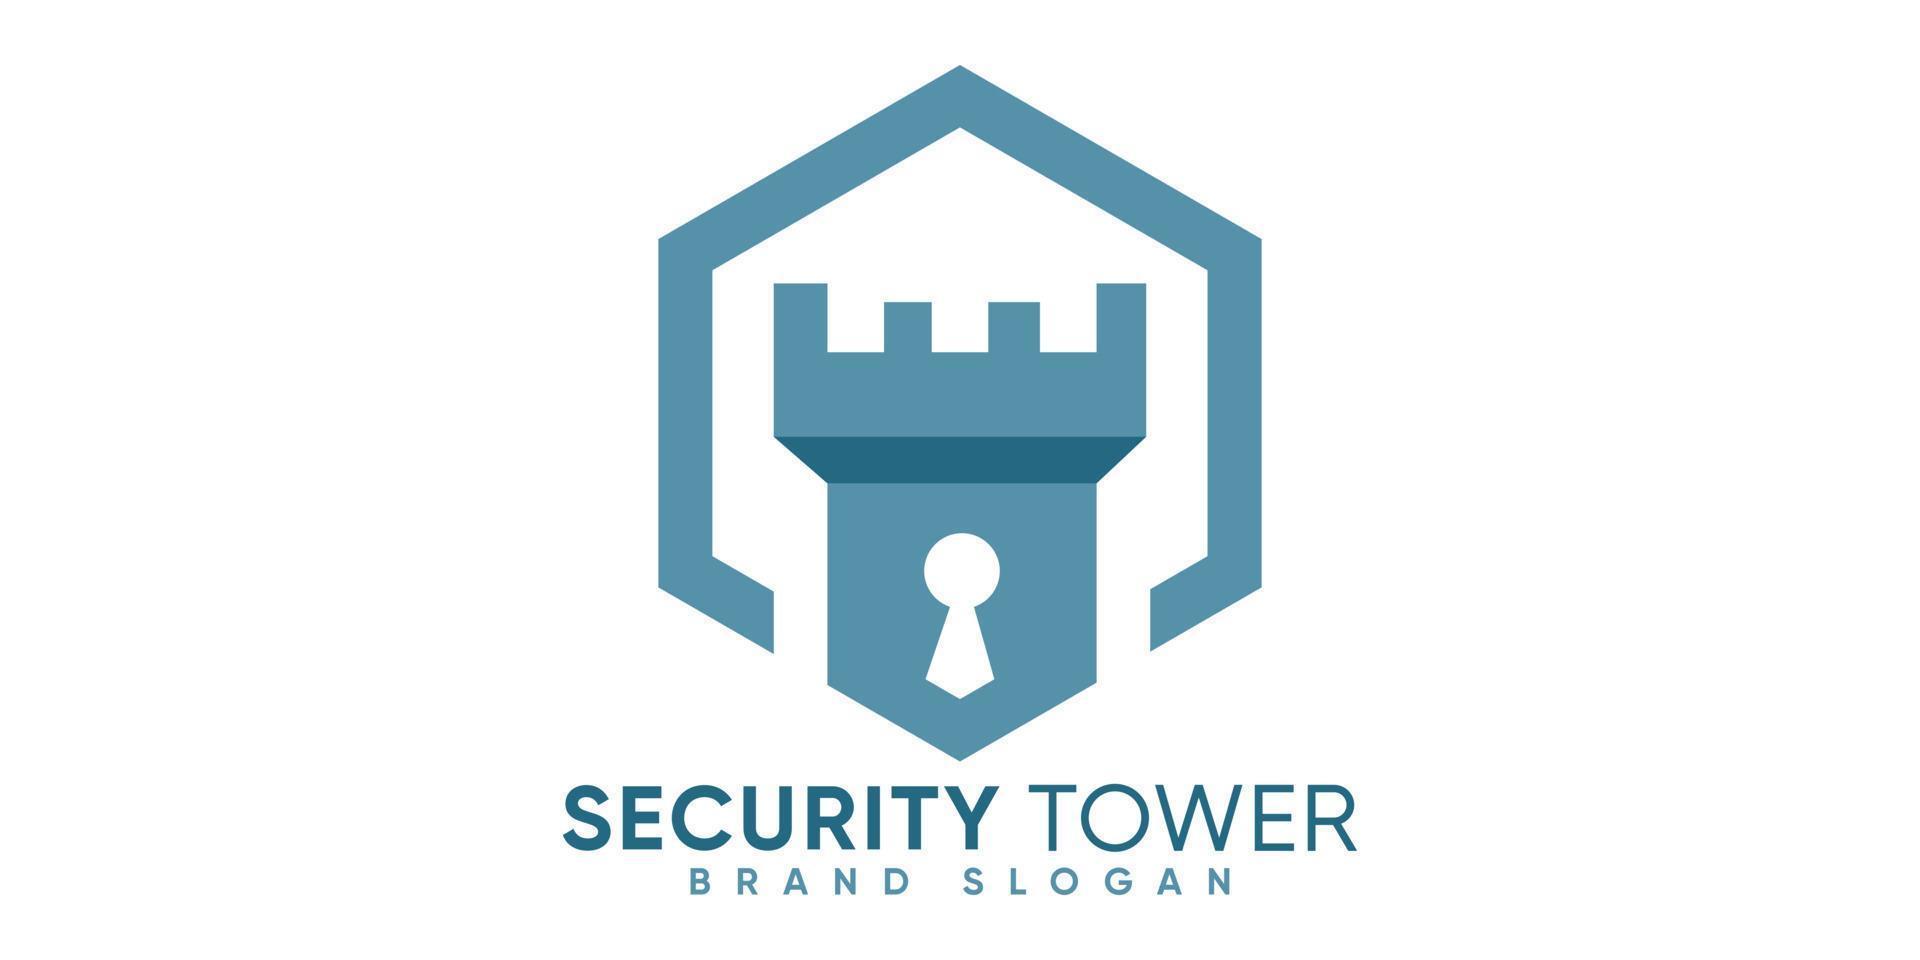 SIMPLE SECURITY HEXAGON TOWER LOGO WITH MODERN STYLE PREMIUM VECTOR